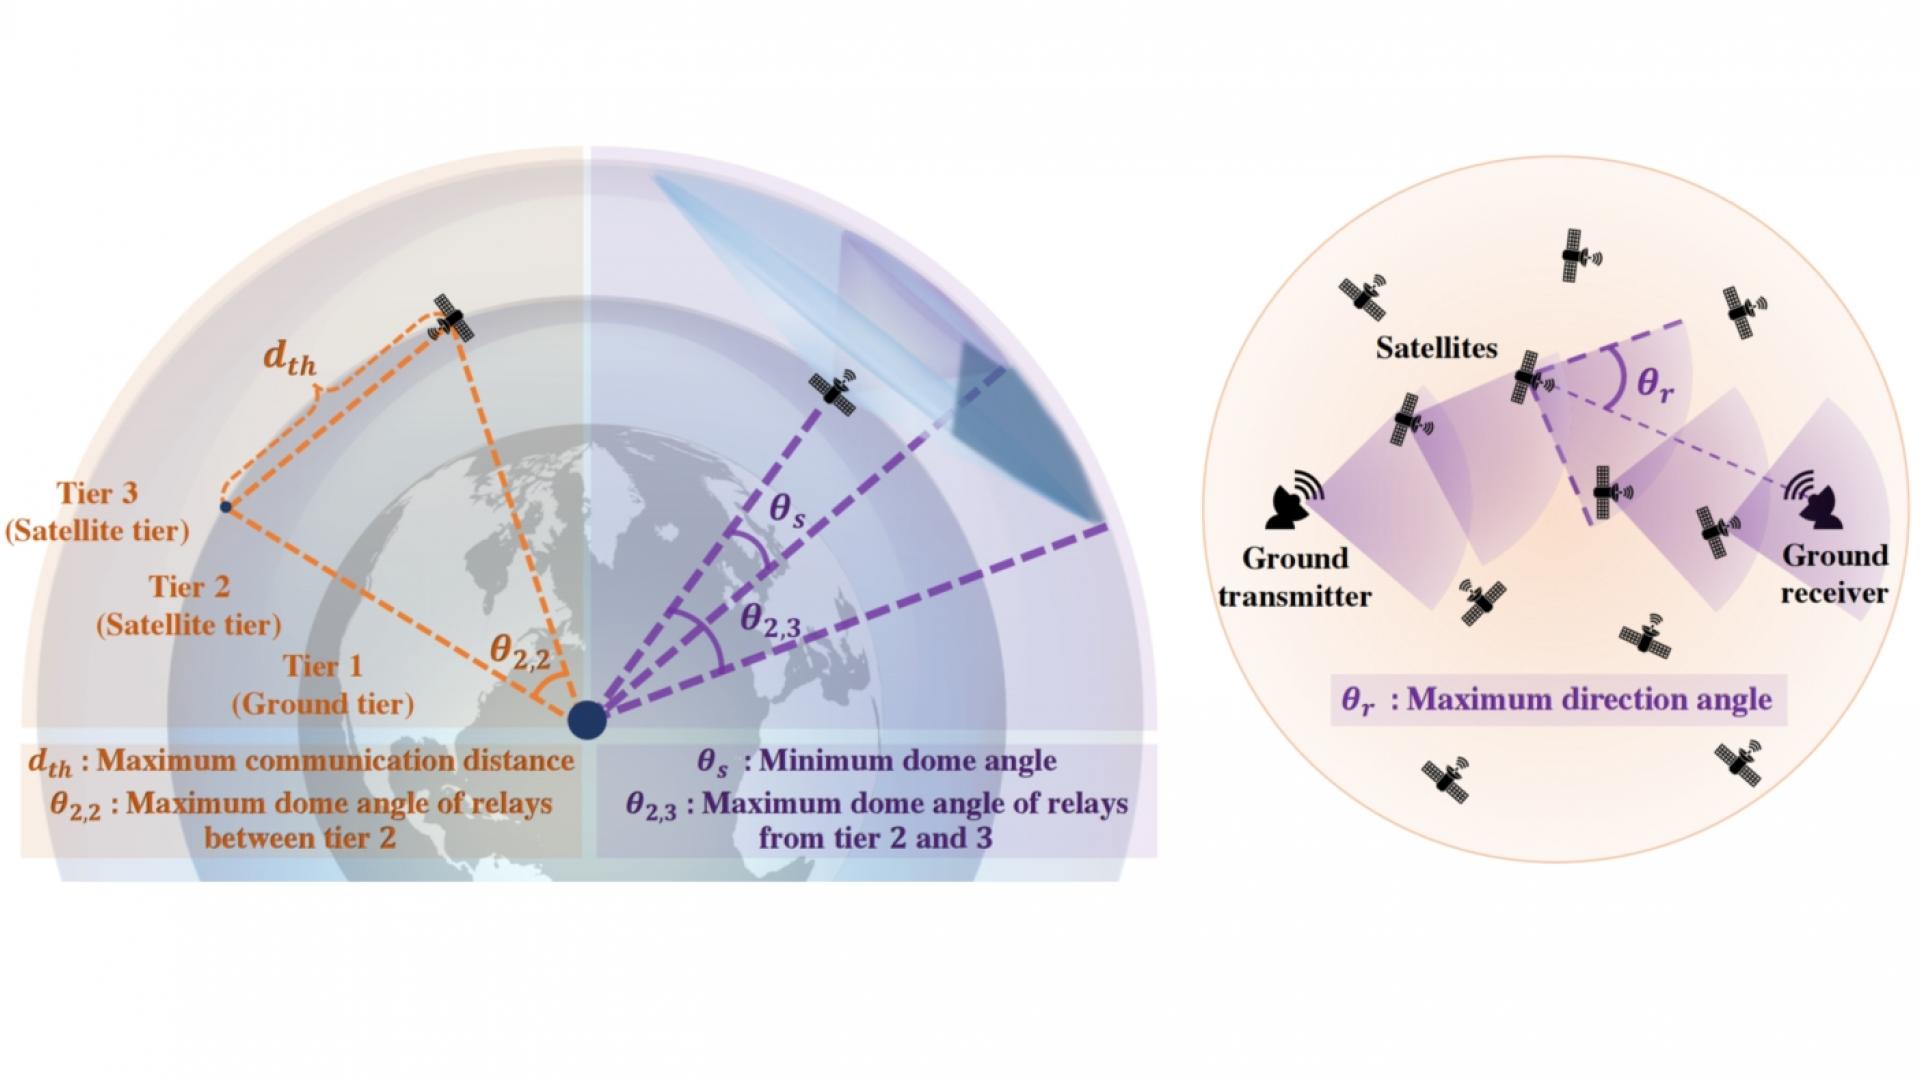 Research explores enhancing reliability in hybrid satellite-terrestrial networks